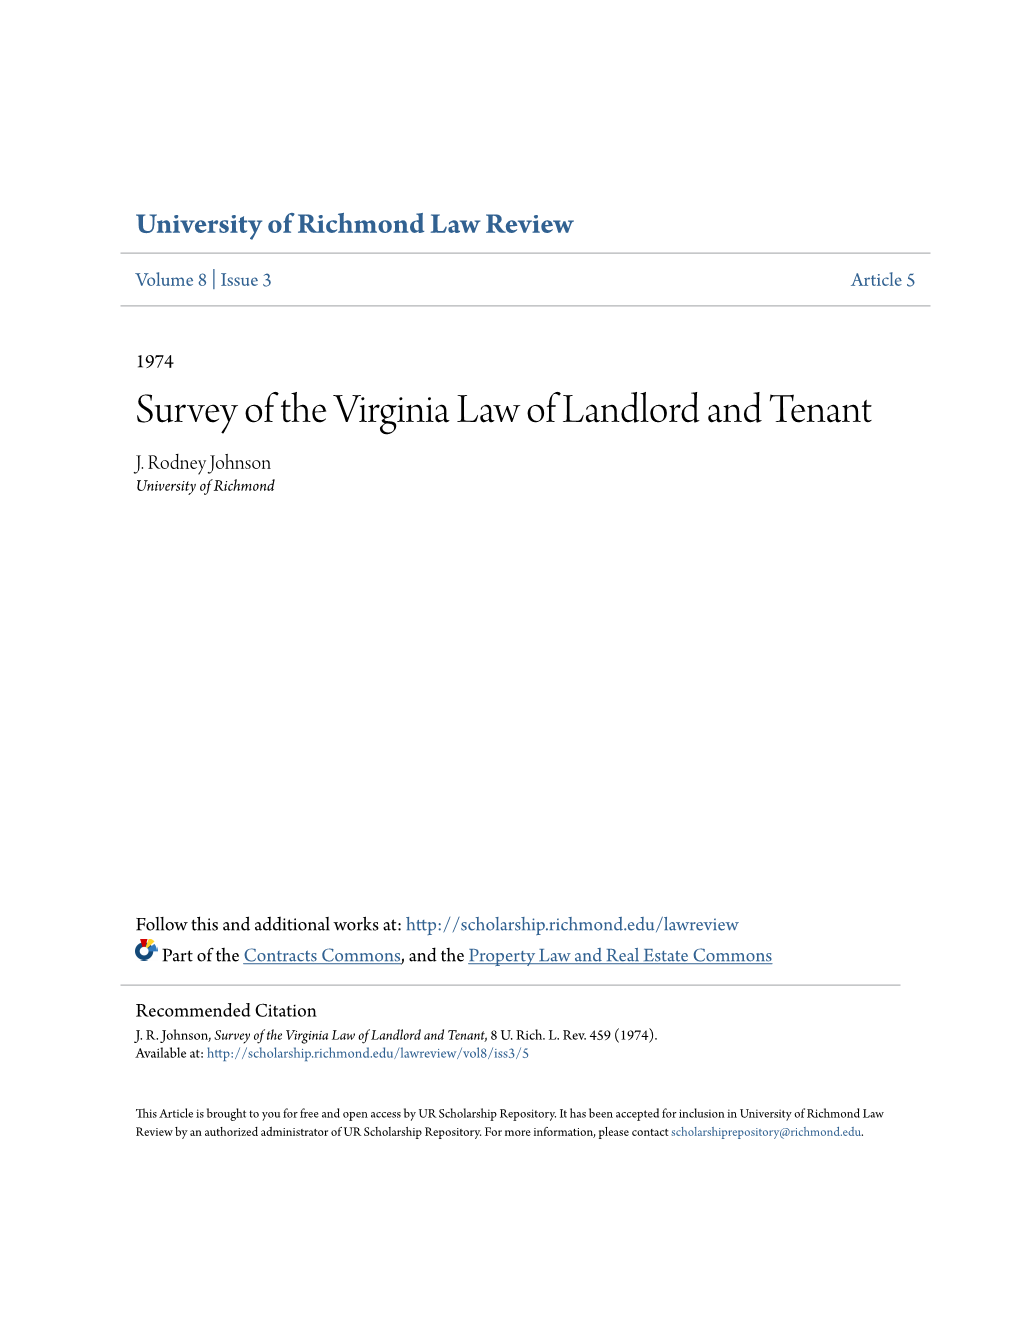 Survey of the Virginia Law of Landlord and Tenant J